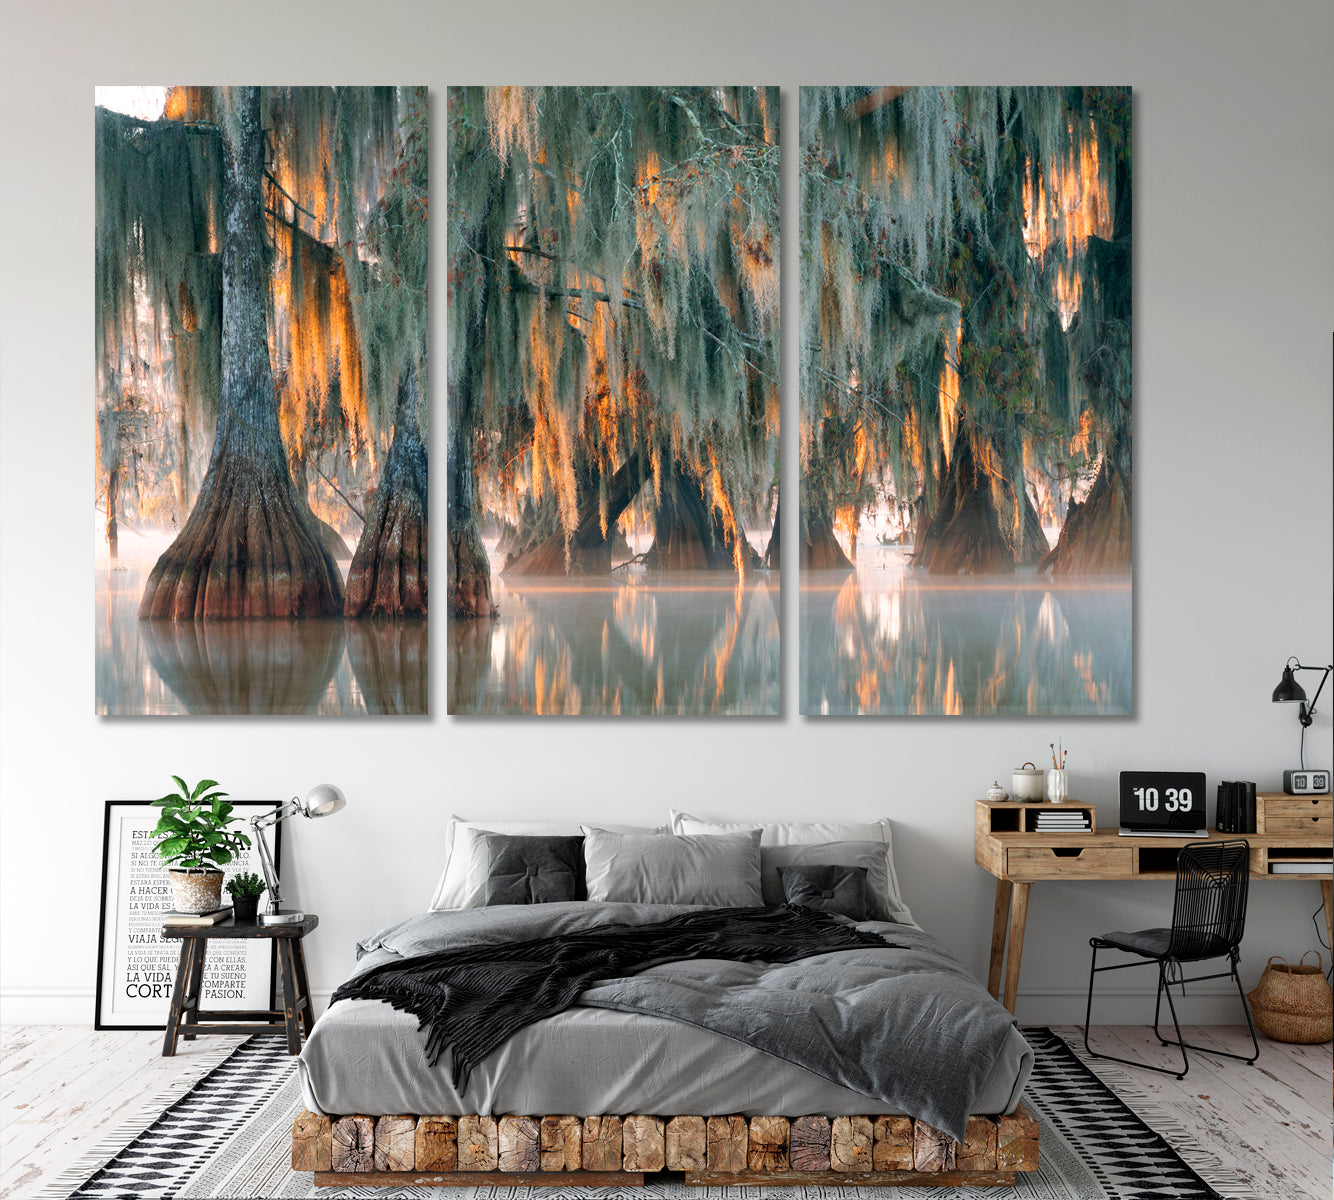 AMAZING HUGE TREE Most Incredible Unique Trees Bald Cypress Nature Wall Canvas Print Artesty 3 panels 36" x 24" 